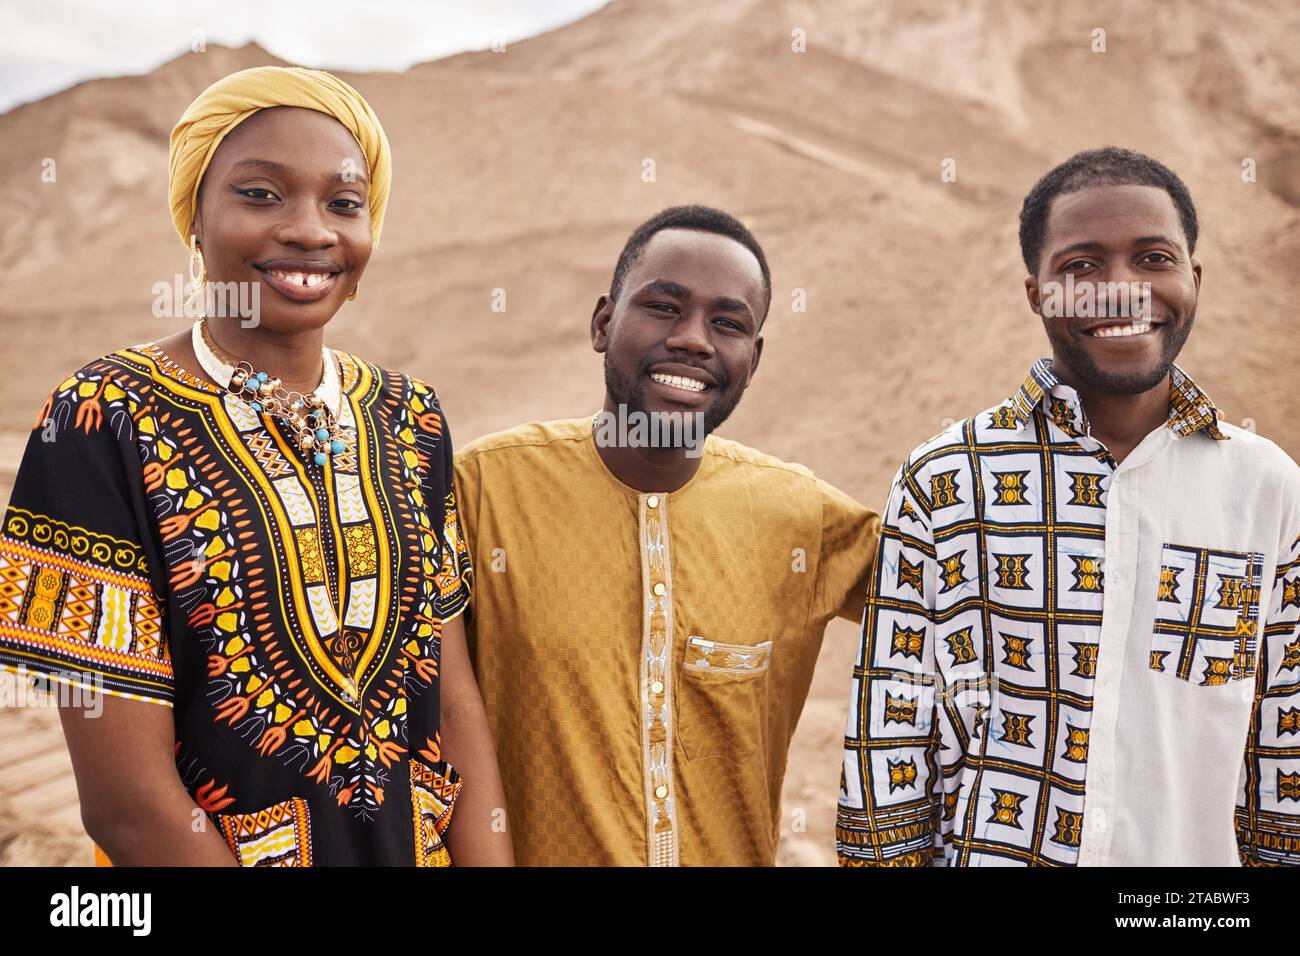 Group of young African American people wearing traditional clothing in desert, all smiling Stock Photo